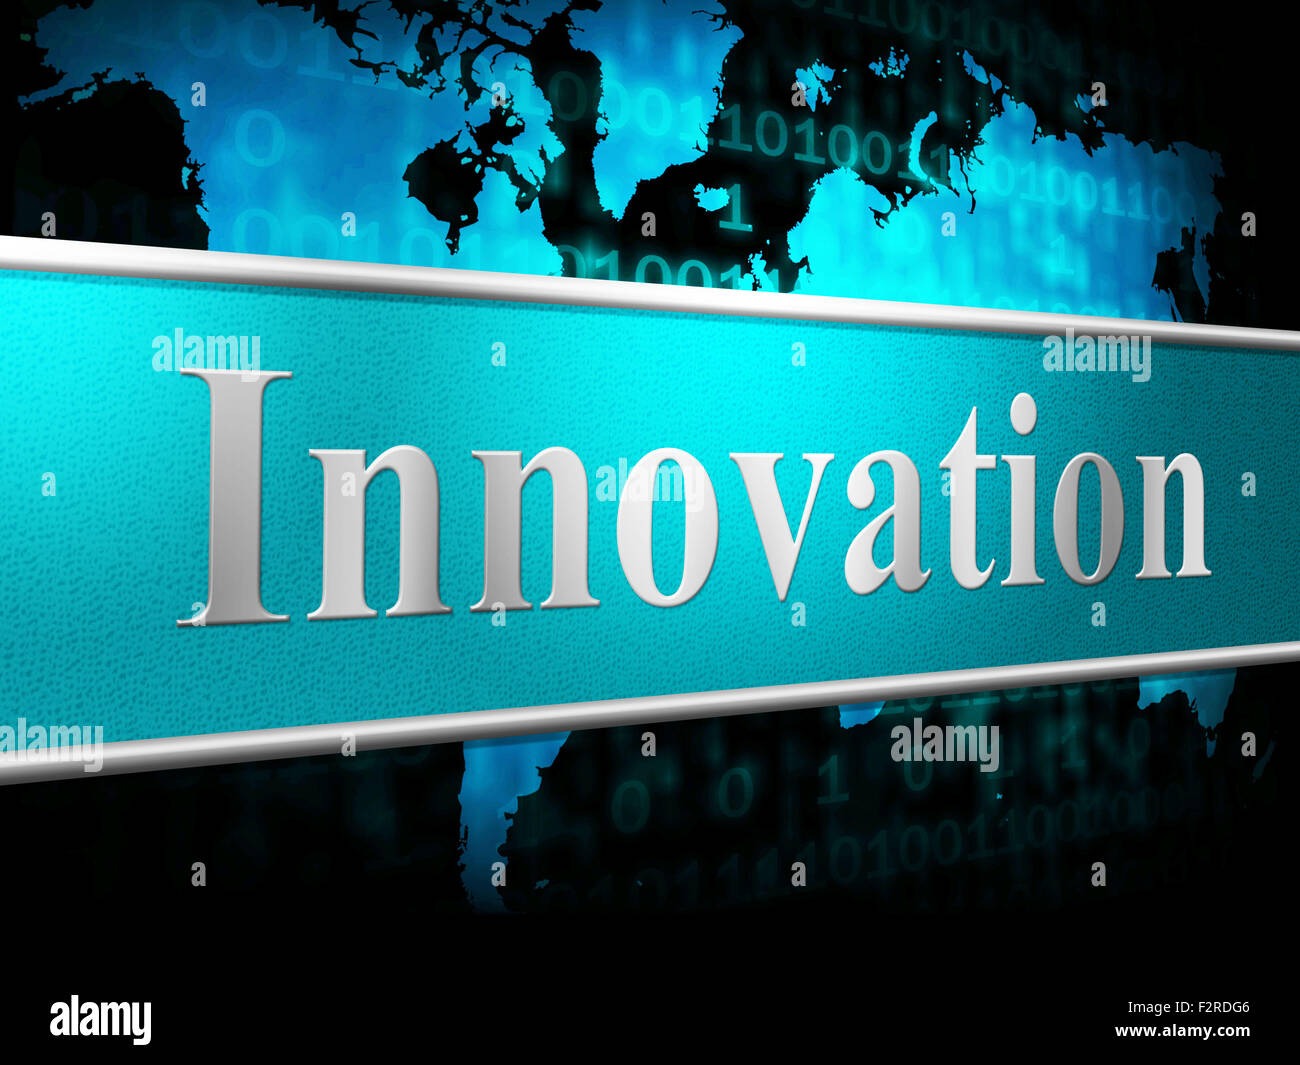 Ideas Innovation Meaning Inventions Reorganization And Revolution Stock Photo